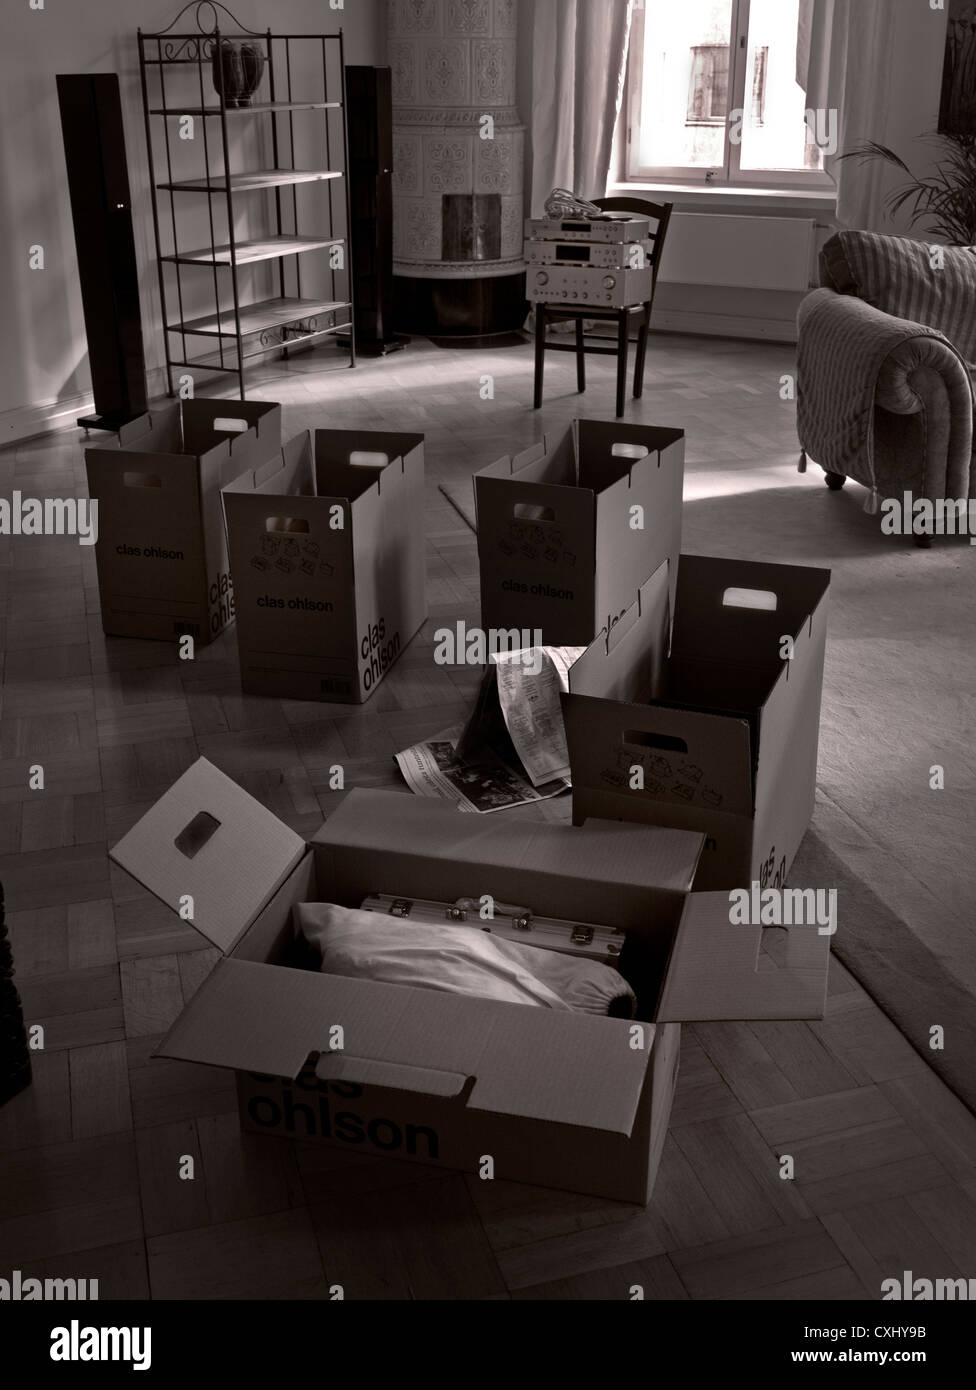 HOUSE MOVE PACKING CASES REMOVALS REPOSESSION Cardboard packing boxes with personal effects in living room during a house pack and move (B&W) Stock Photo